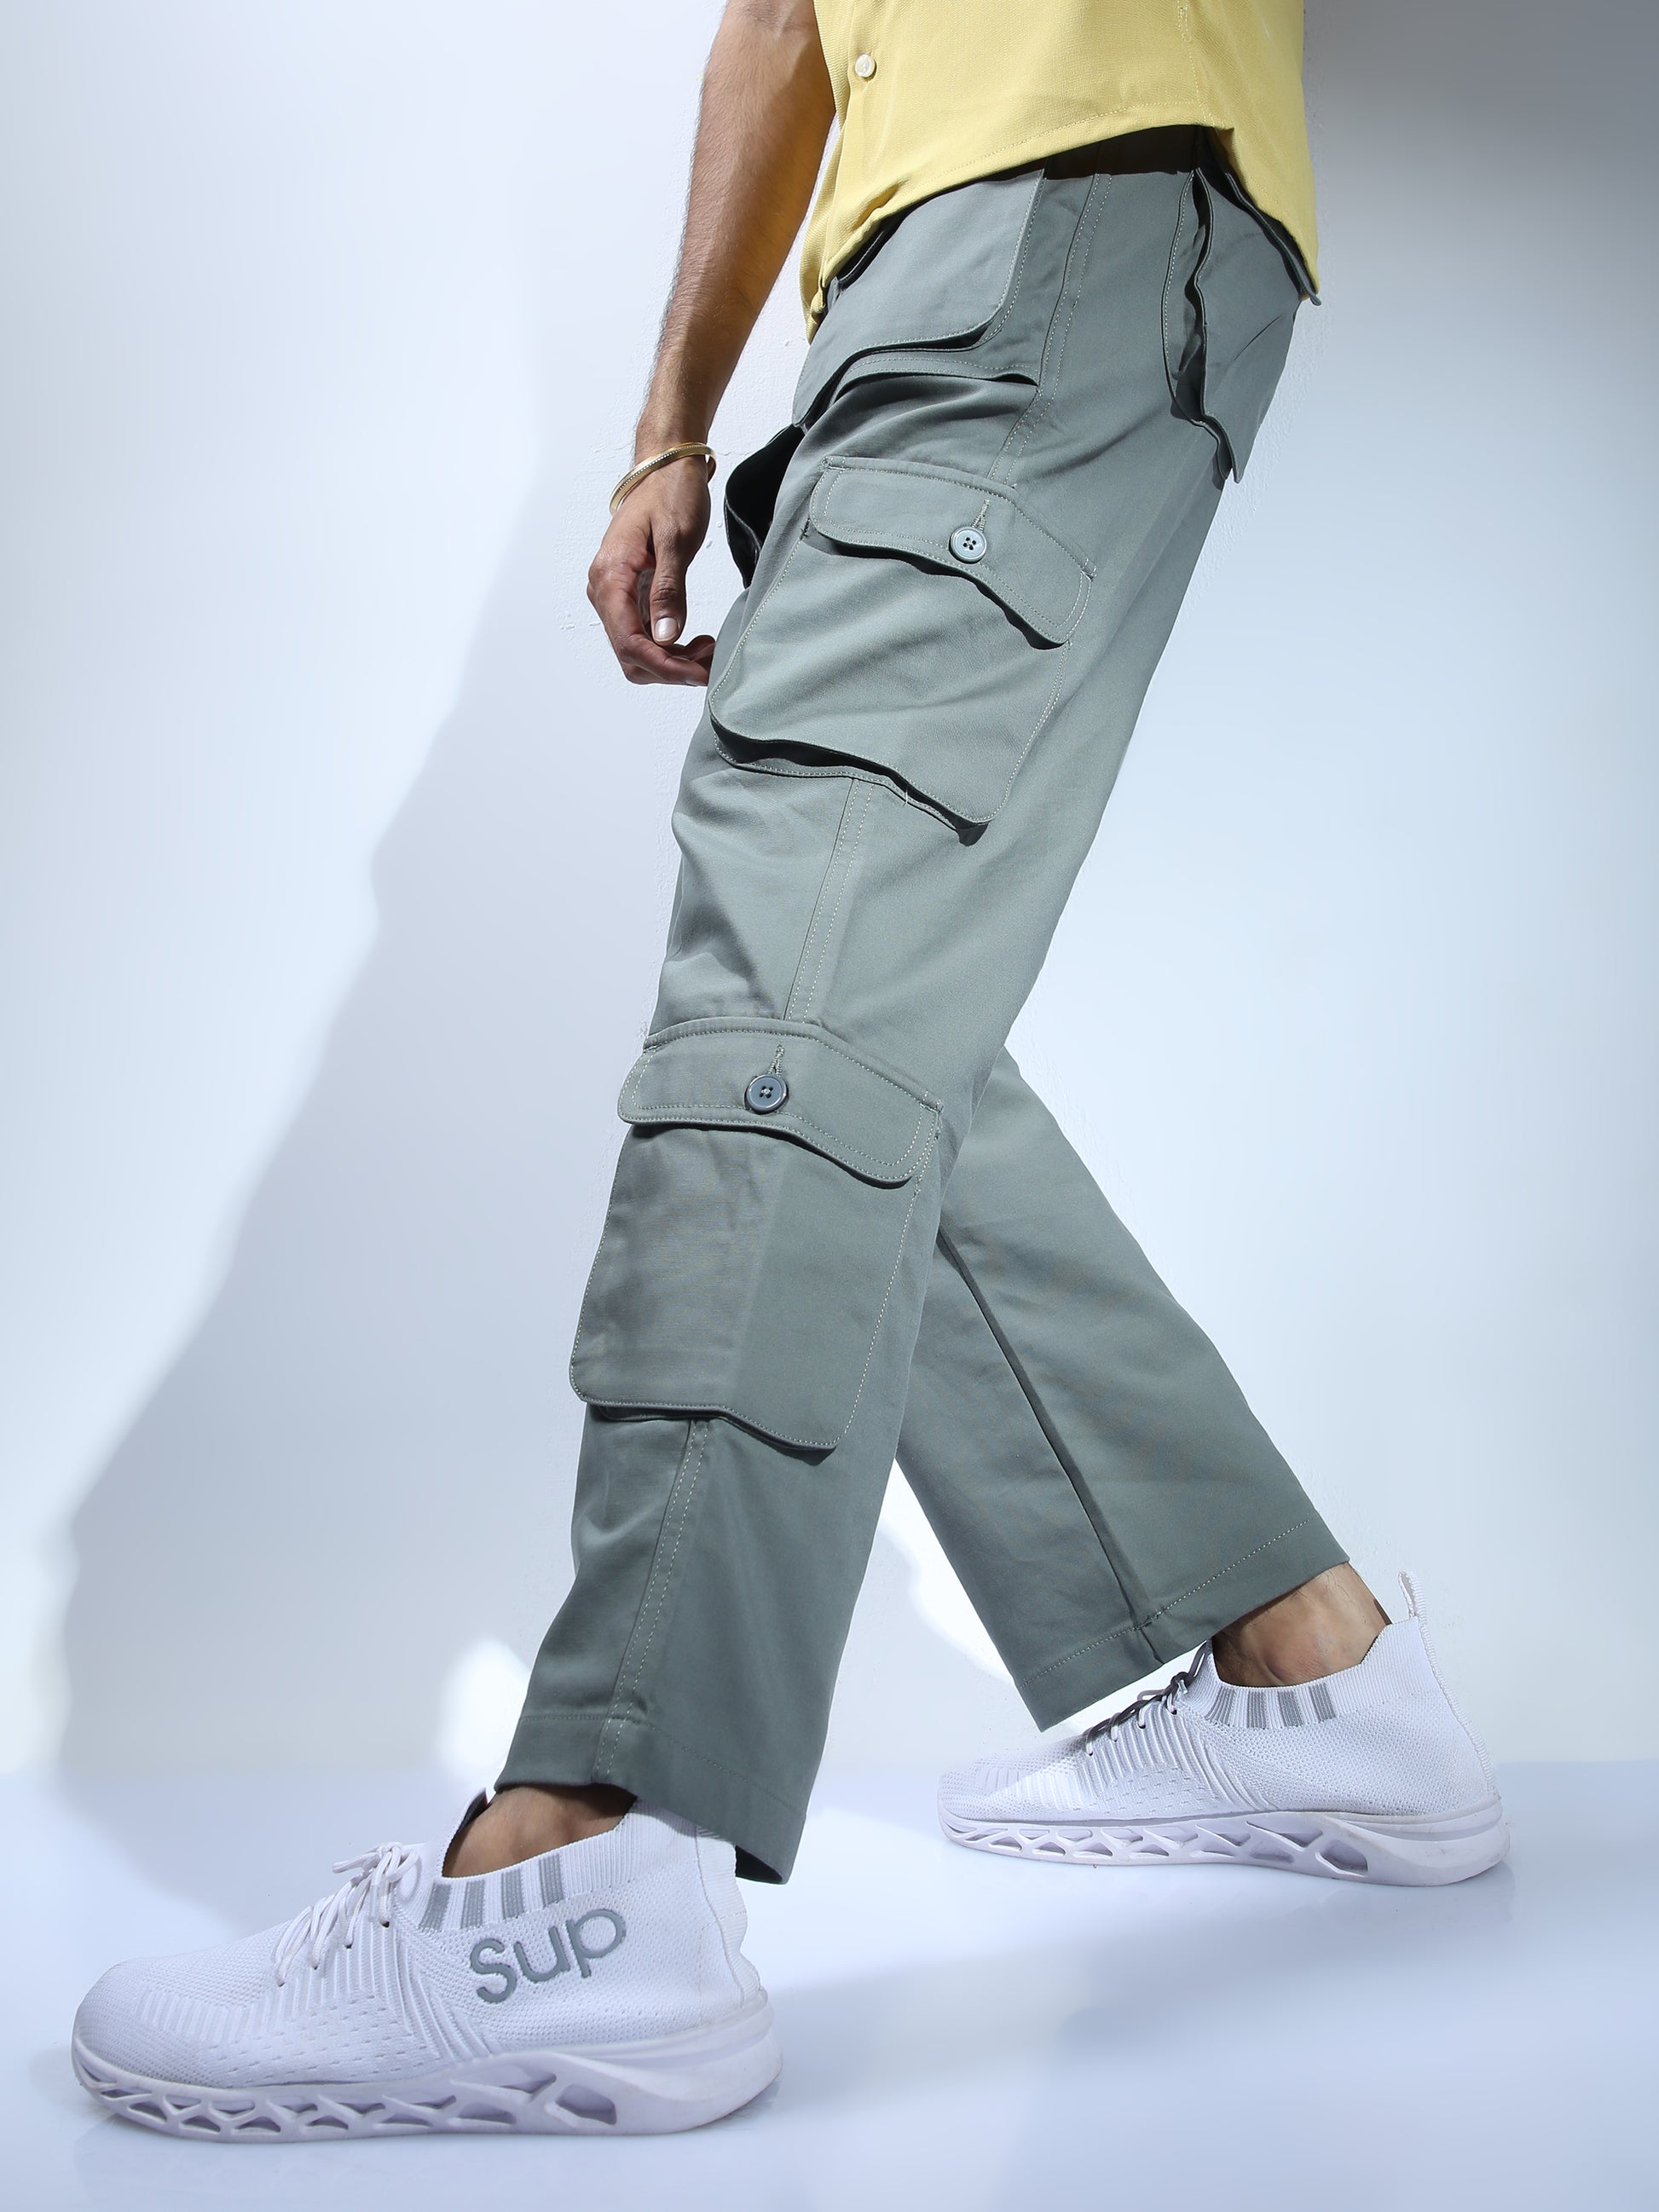 Stone Washed Baggy Cargo Pants, Buy Men Trousers